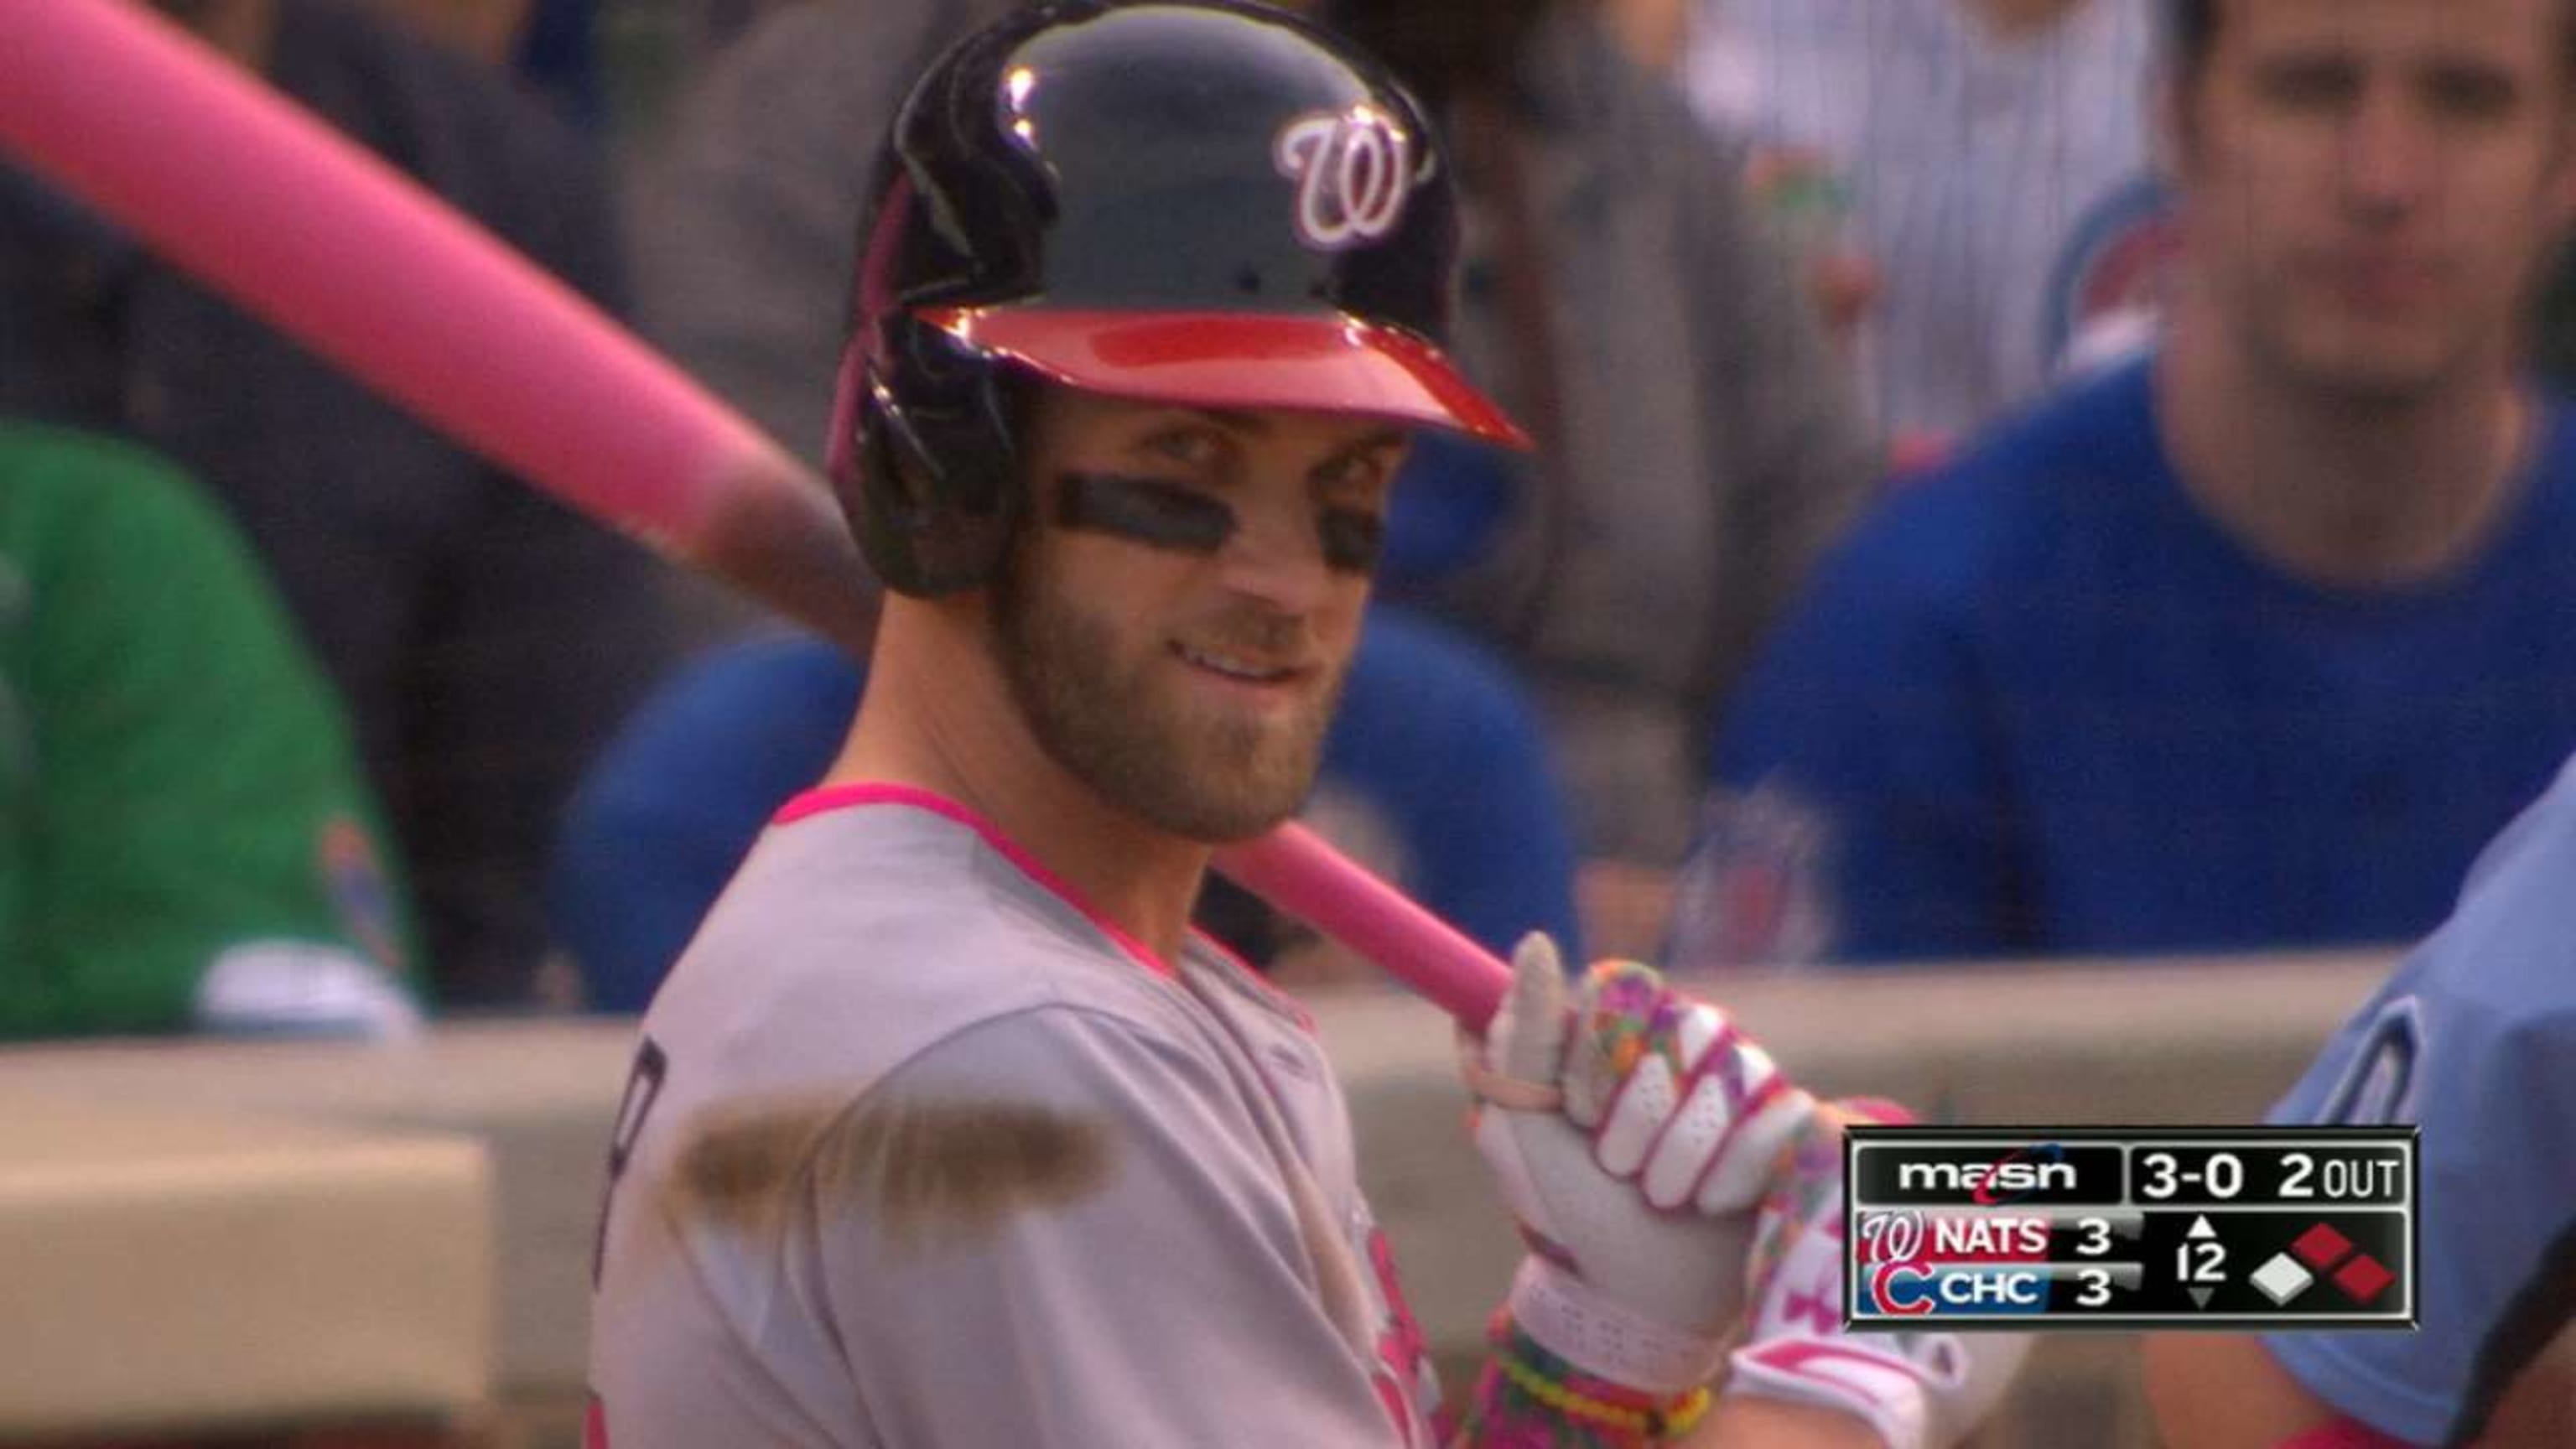 Bryce Harper jokes about parents missing grand slam, has colorful